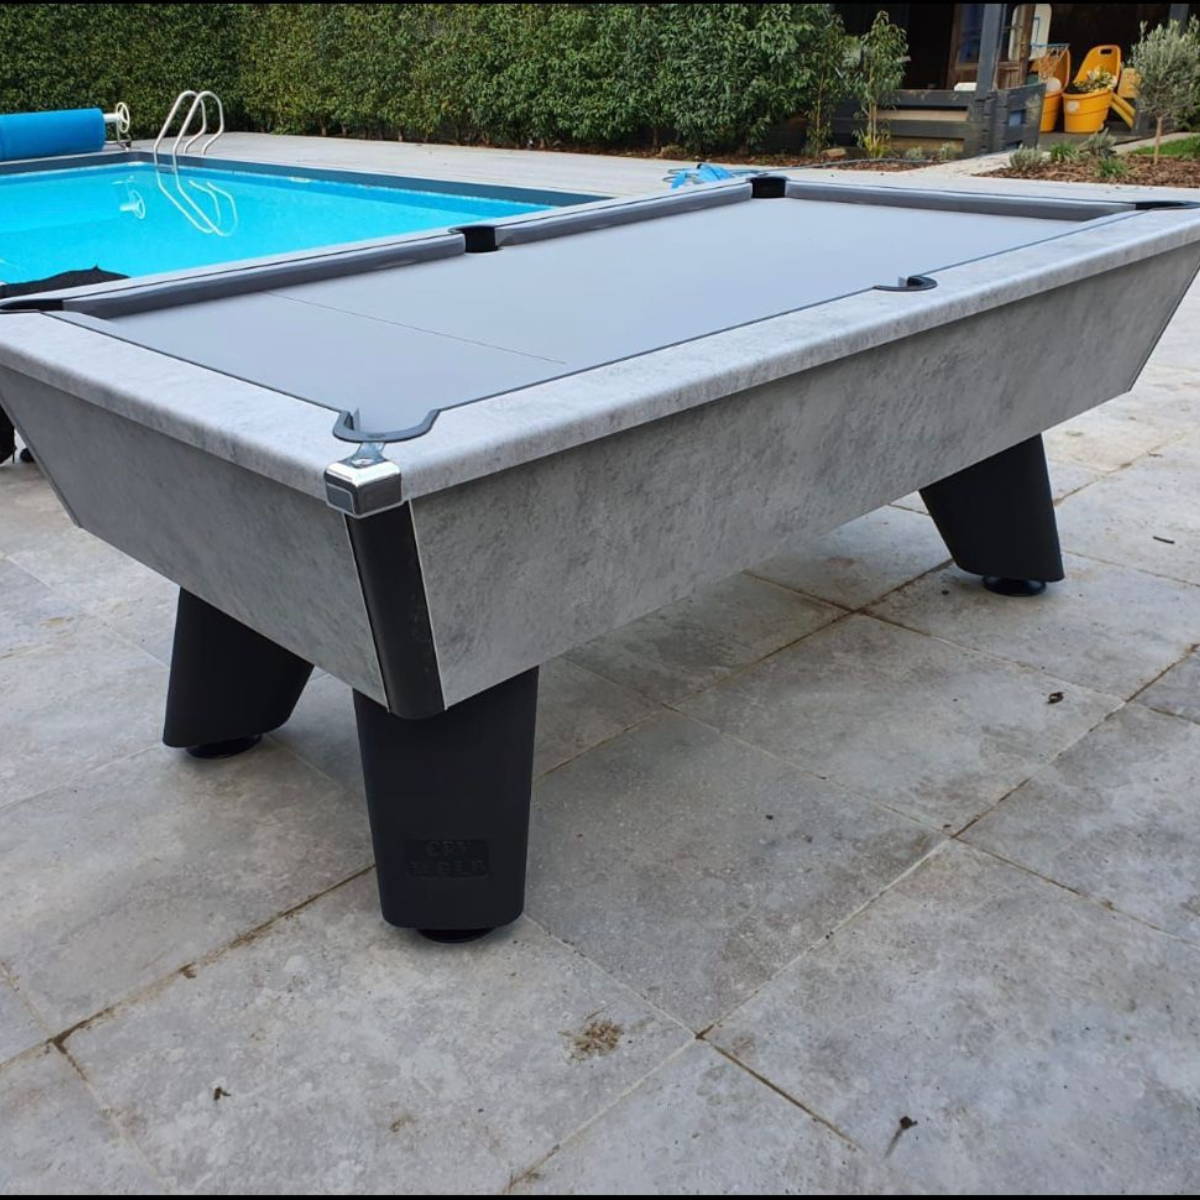 Cry Wolf Slate Bed Outdoor Pool Table - Urban Grey